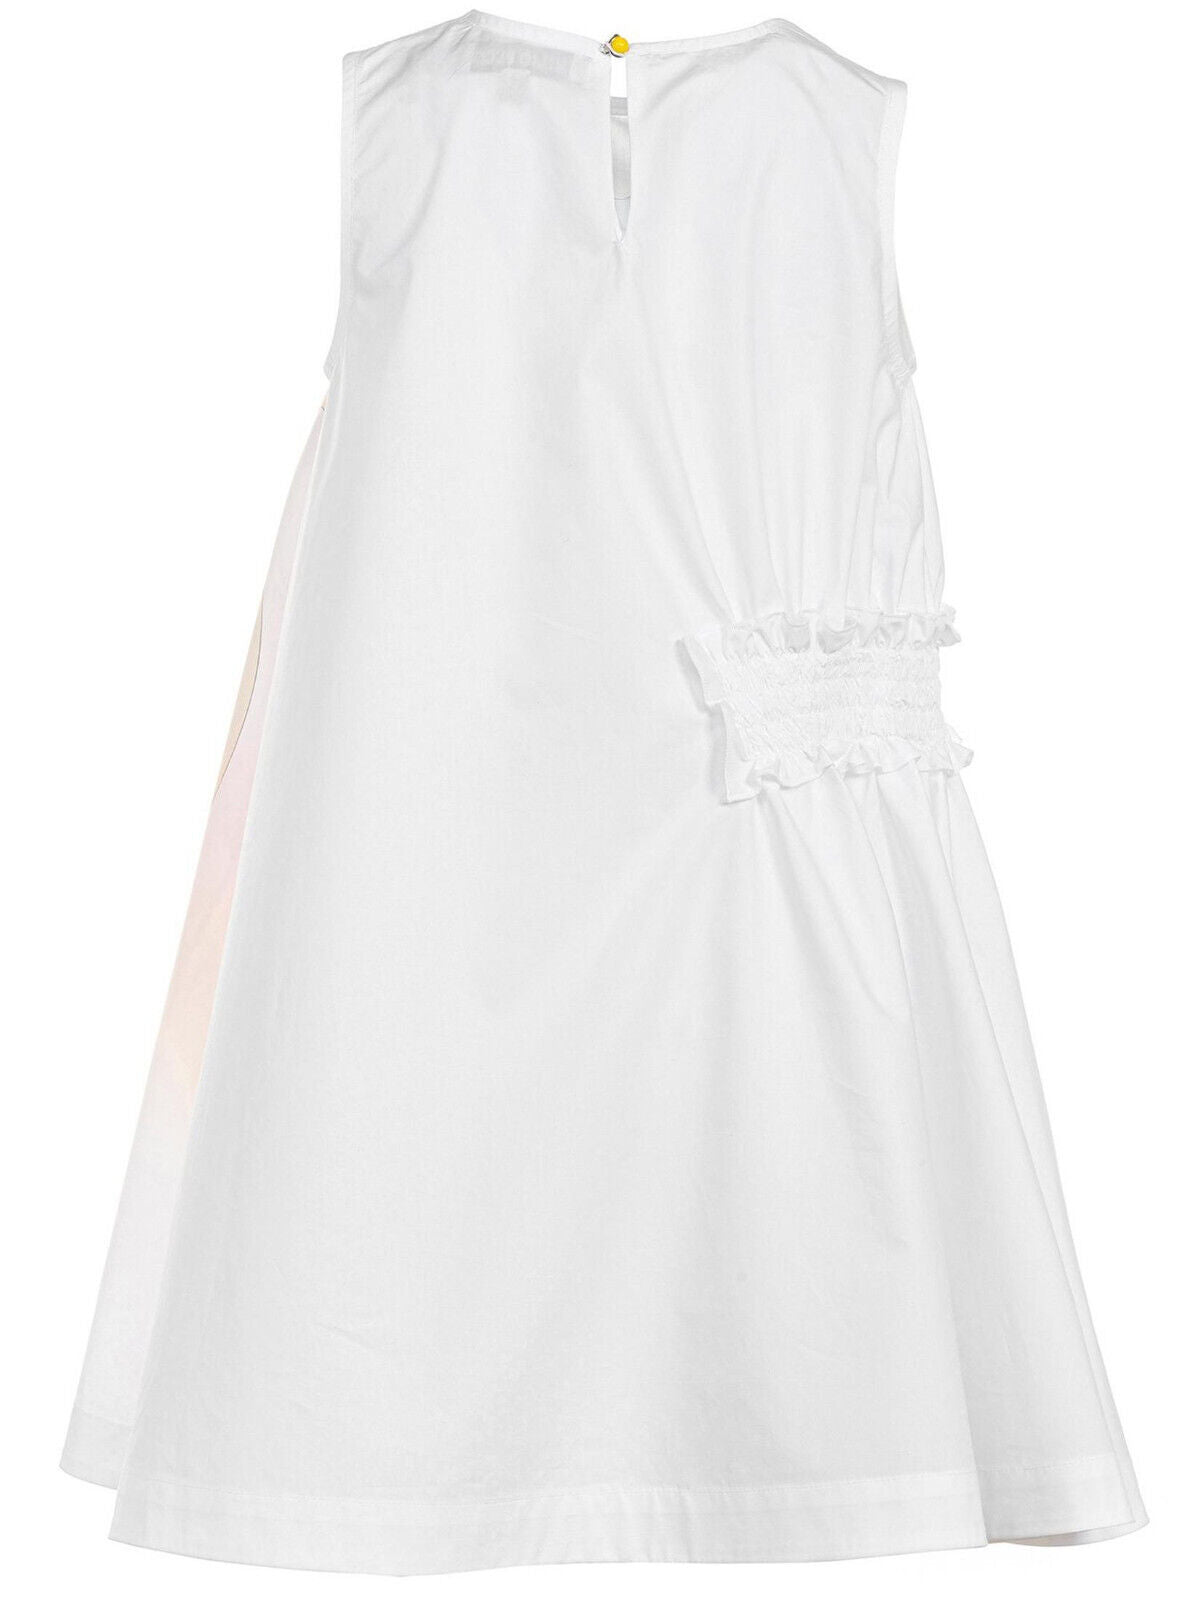 Emilio Pucci Kids Logo And Ruched Side Dress - White. 2 Years. ****V76